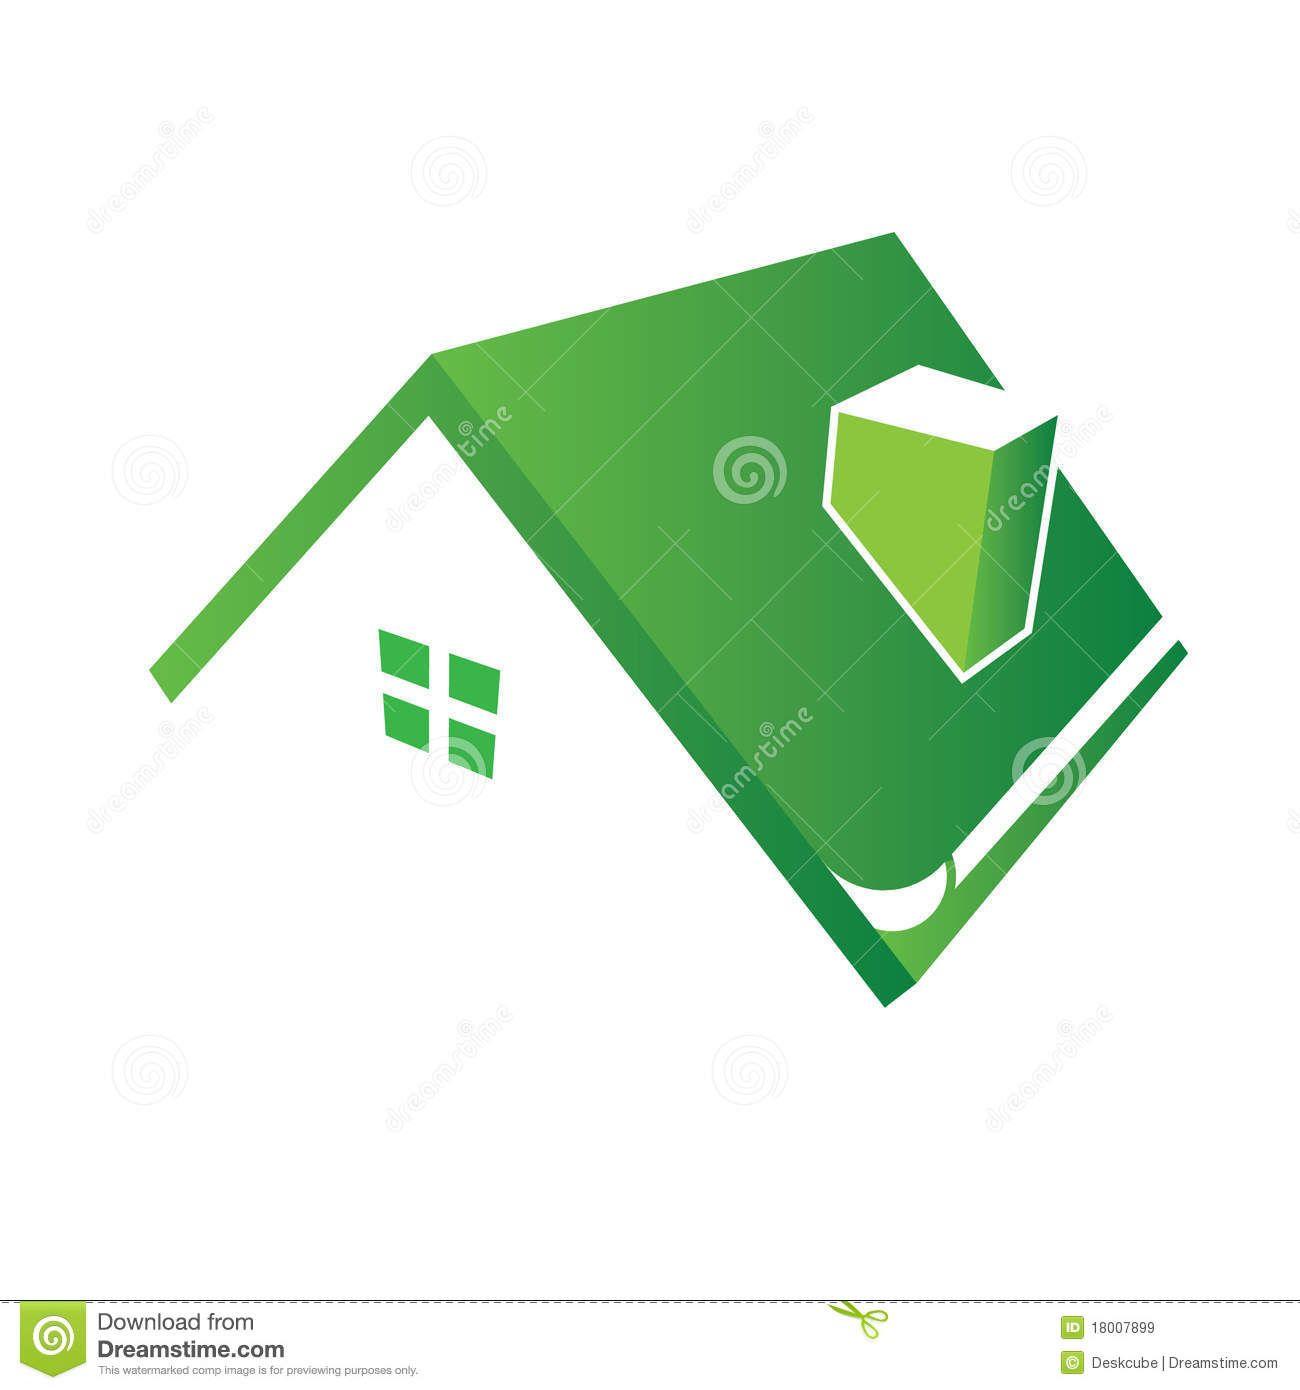 Home Roof Logo - Home roof logo | Clipart Panda - Free Clipart Images